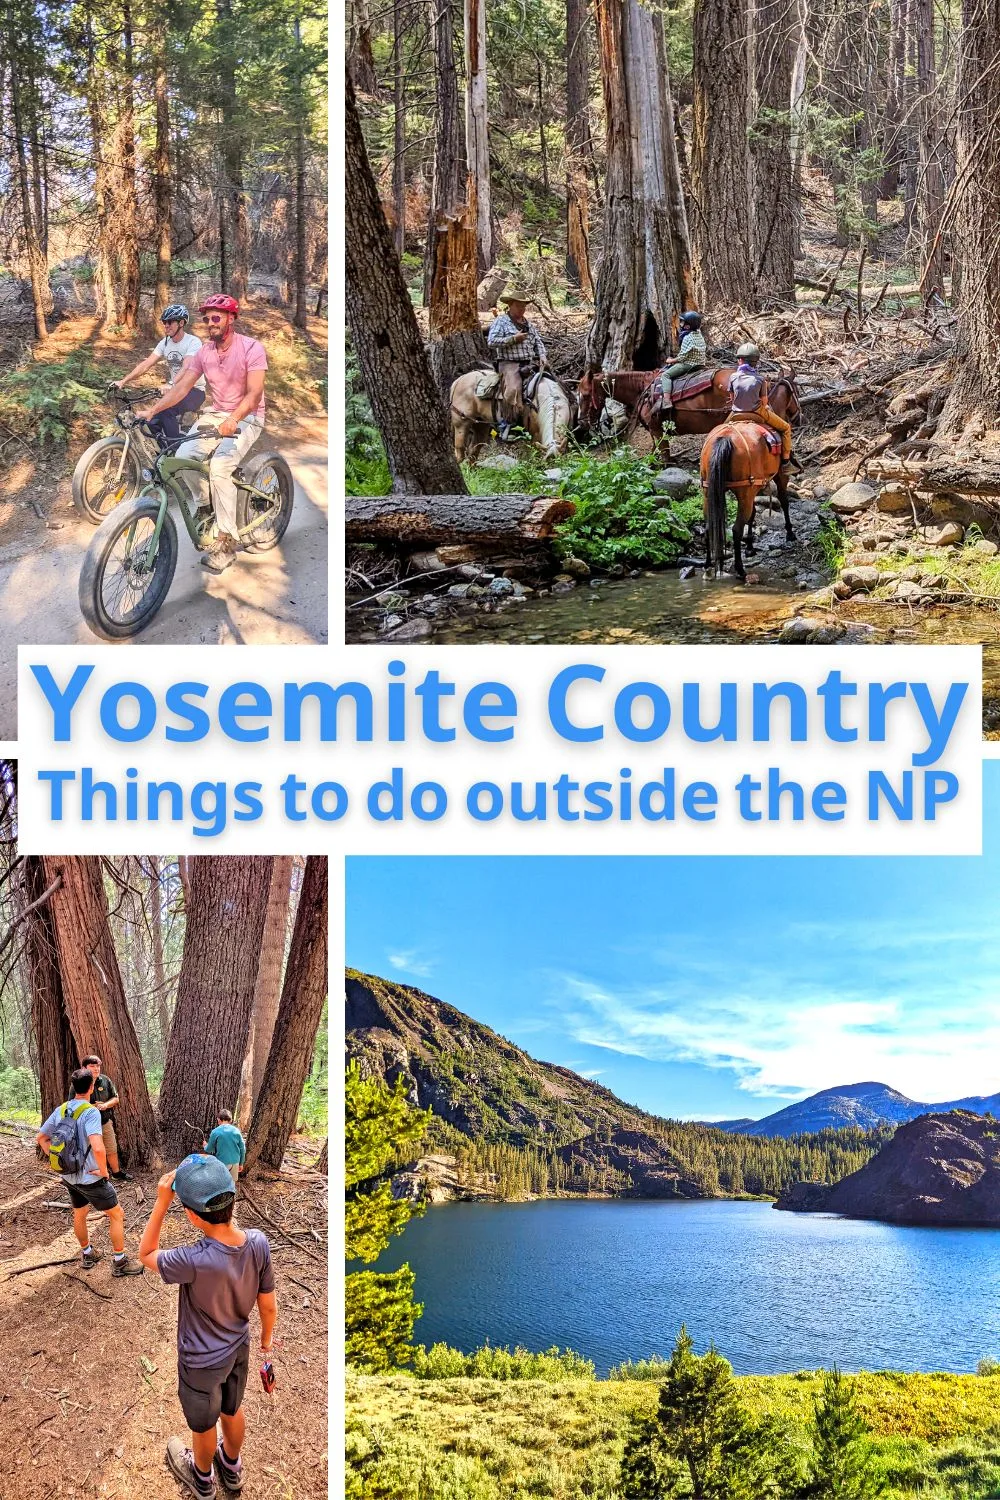 Outside of the National Park there are tons of things to do in Yosemite Country. From hiking in the Sierra National Forest to off-roading and horseback riding, our top picks for adventures outside the National Park.